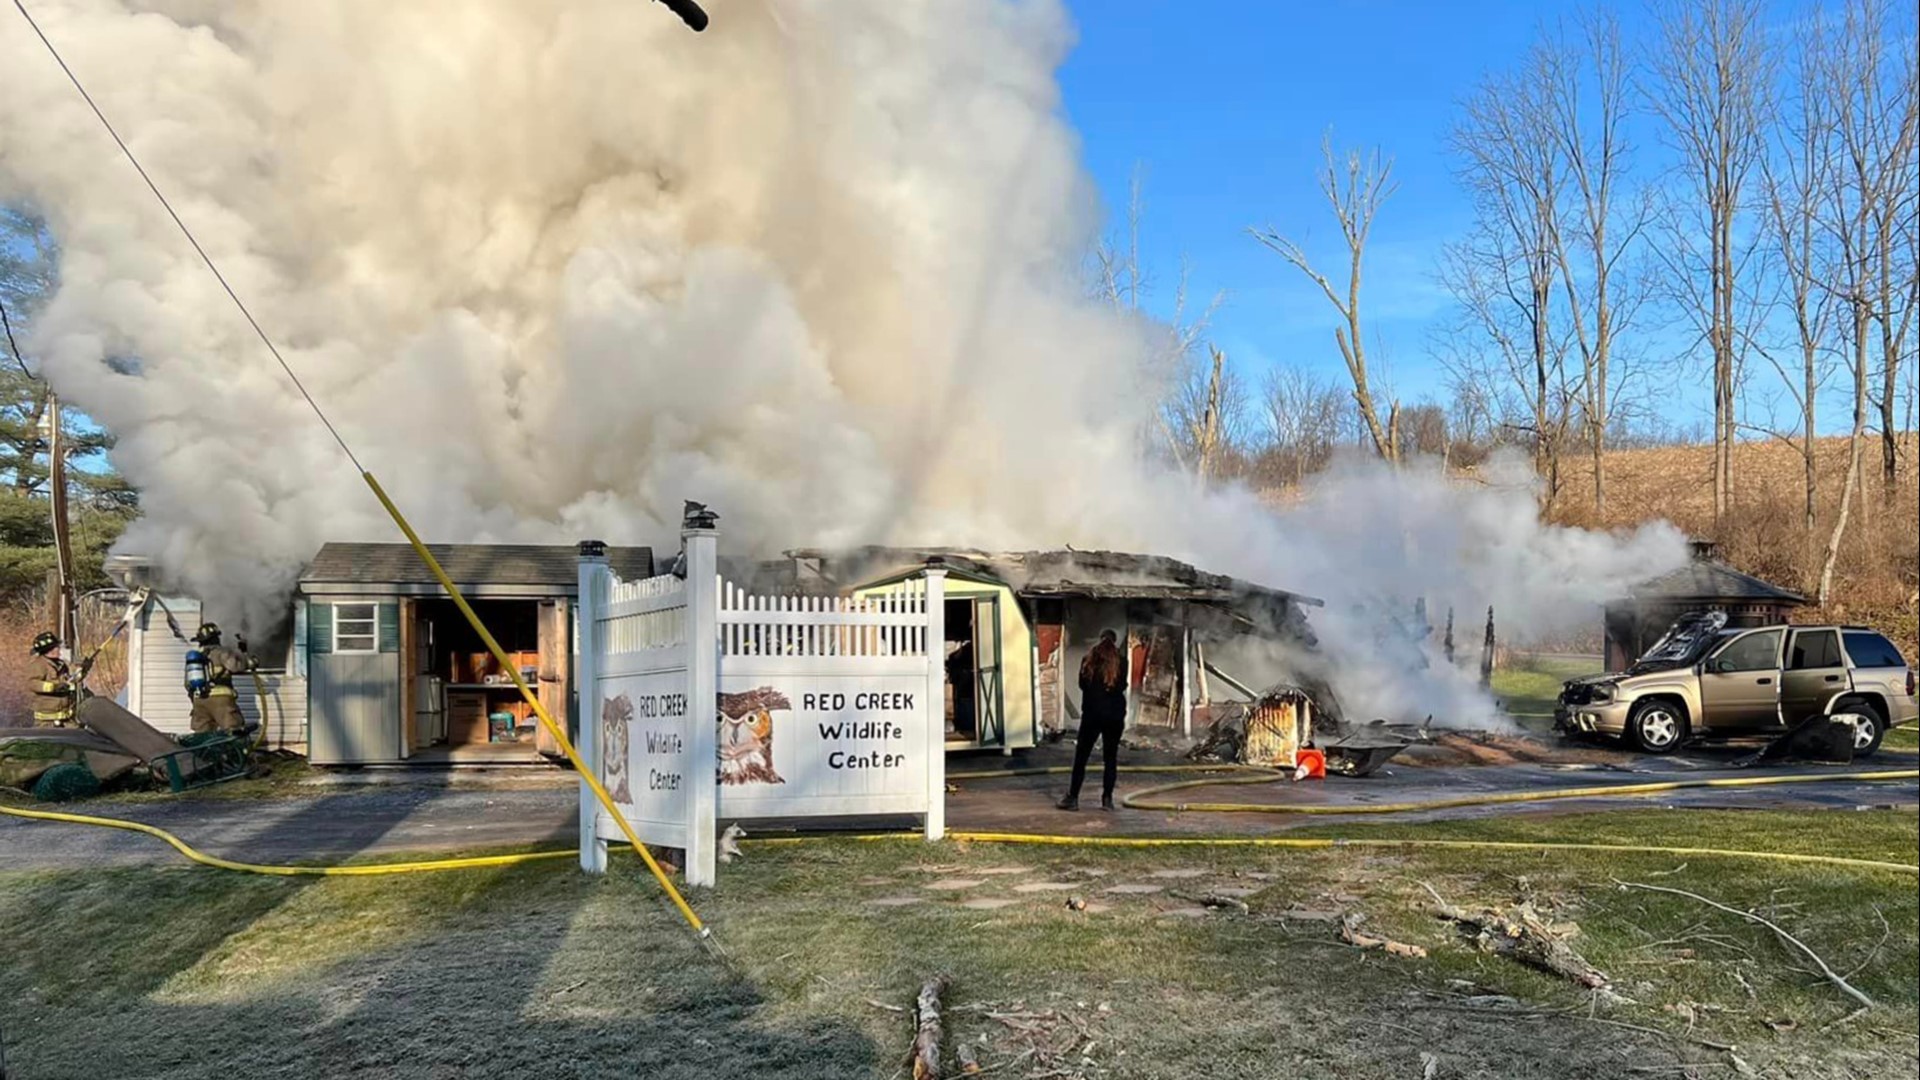 Firefighters were called out to the Red Creek Wildlife Center near Schuylkill Haven on Monday morning.